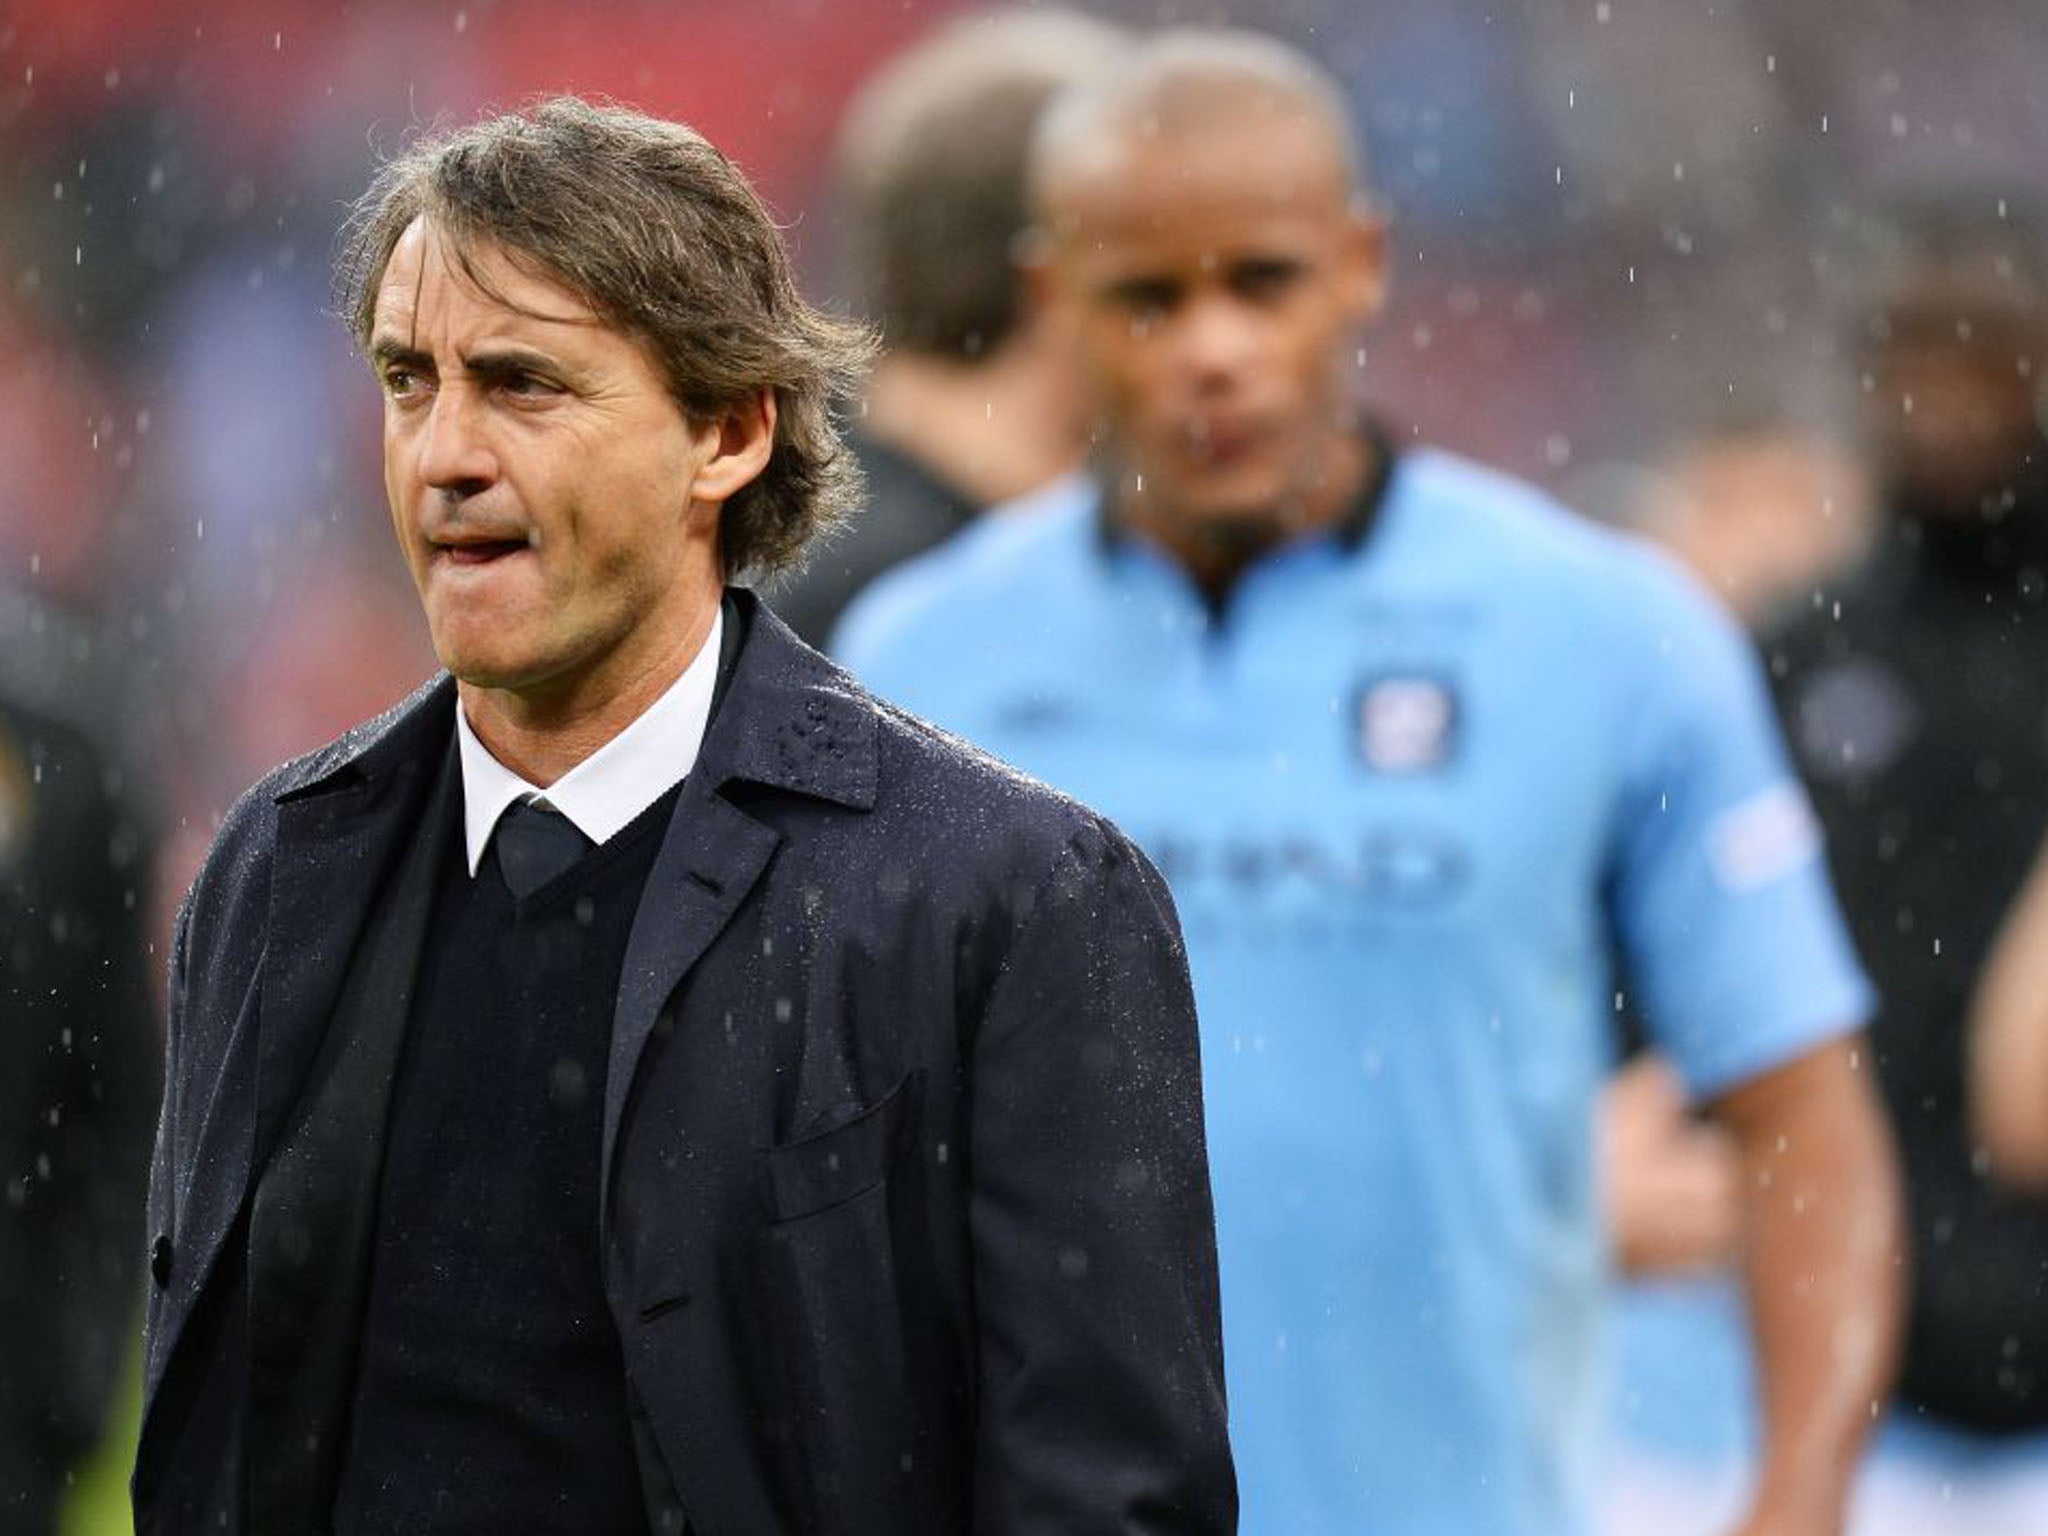 11 May 2013: Mancini looks dejected after losing the FA Cup Final to Wigan 1-0. Manchester City are also well off the pace of their main rivals in the Premier League, with Manchester United winning the title at a canter (Mike Hewitt/Getty Images)